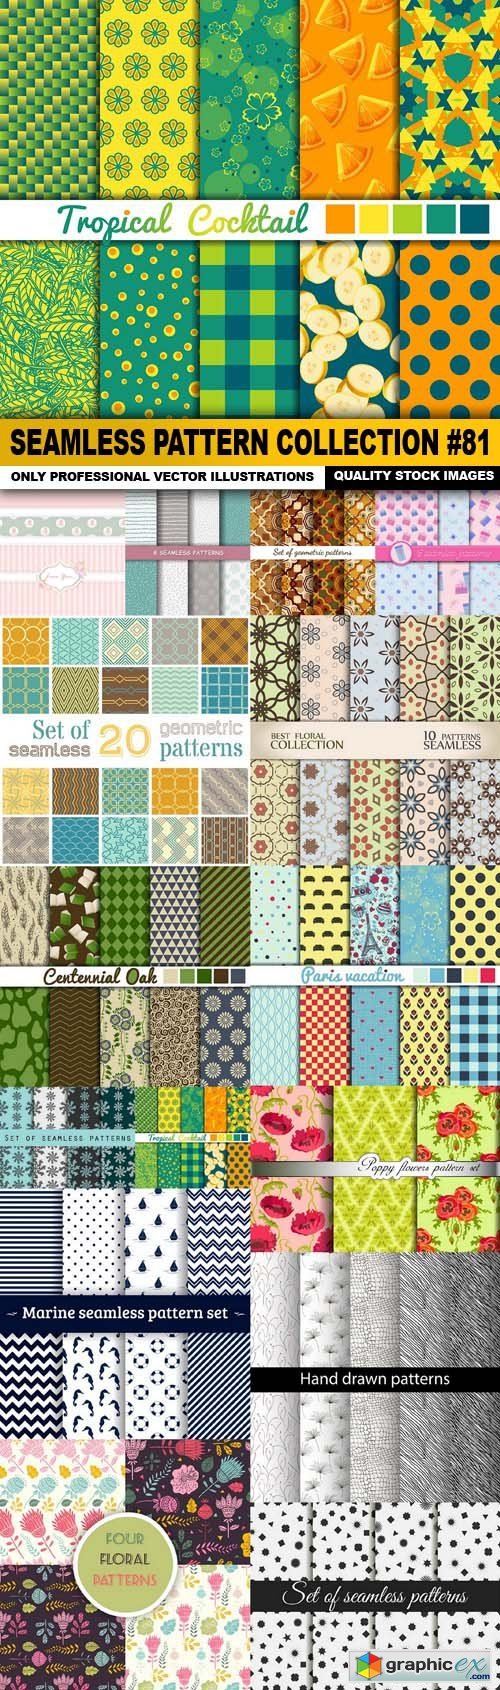 Seamless Pattern Collection #81